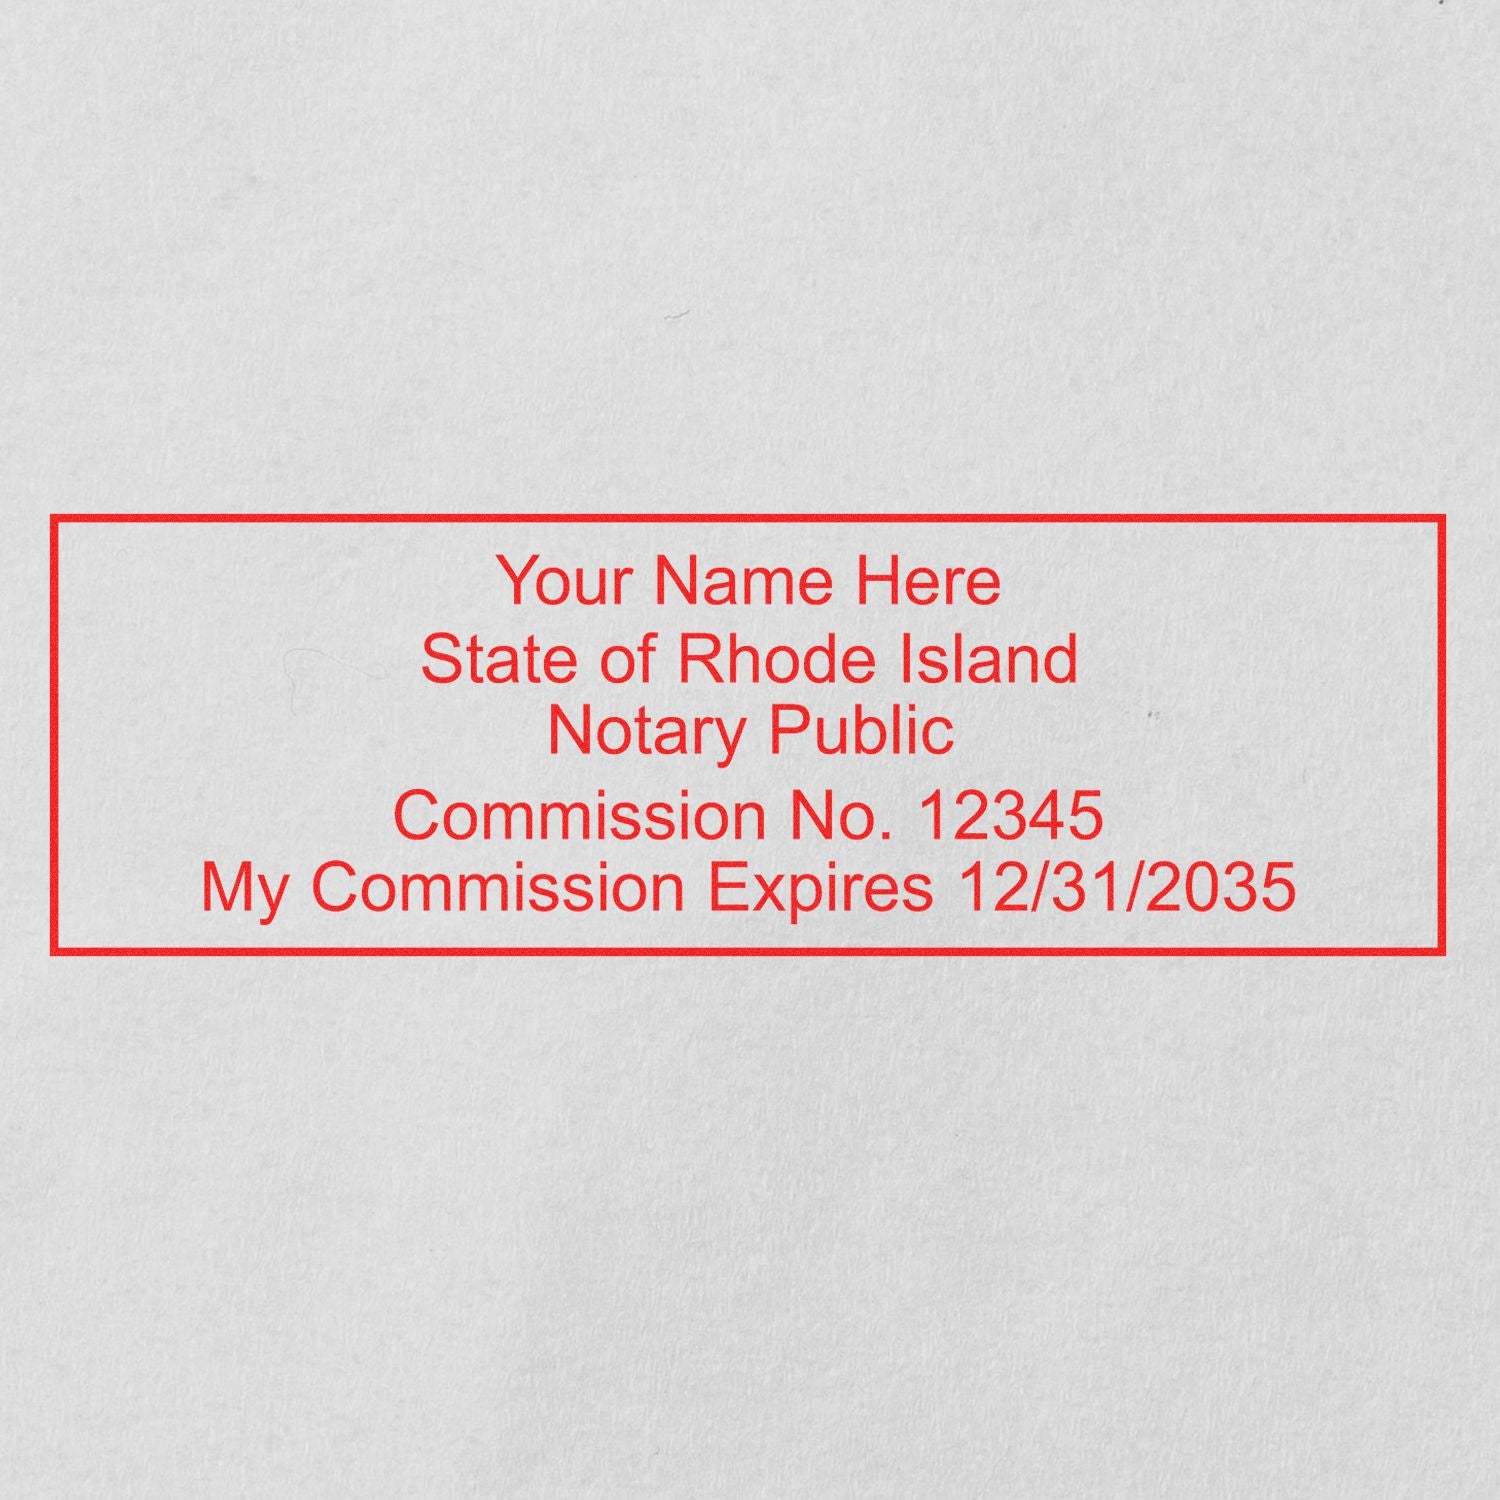 The Heavy-Duty Rhode Island Rectangular Notary Stamp stamp impression comes to life with a crisp, detailed photo on paper - showcasing true professional quality.